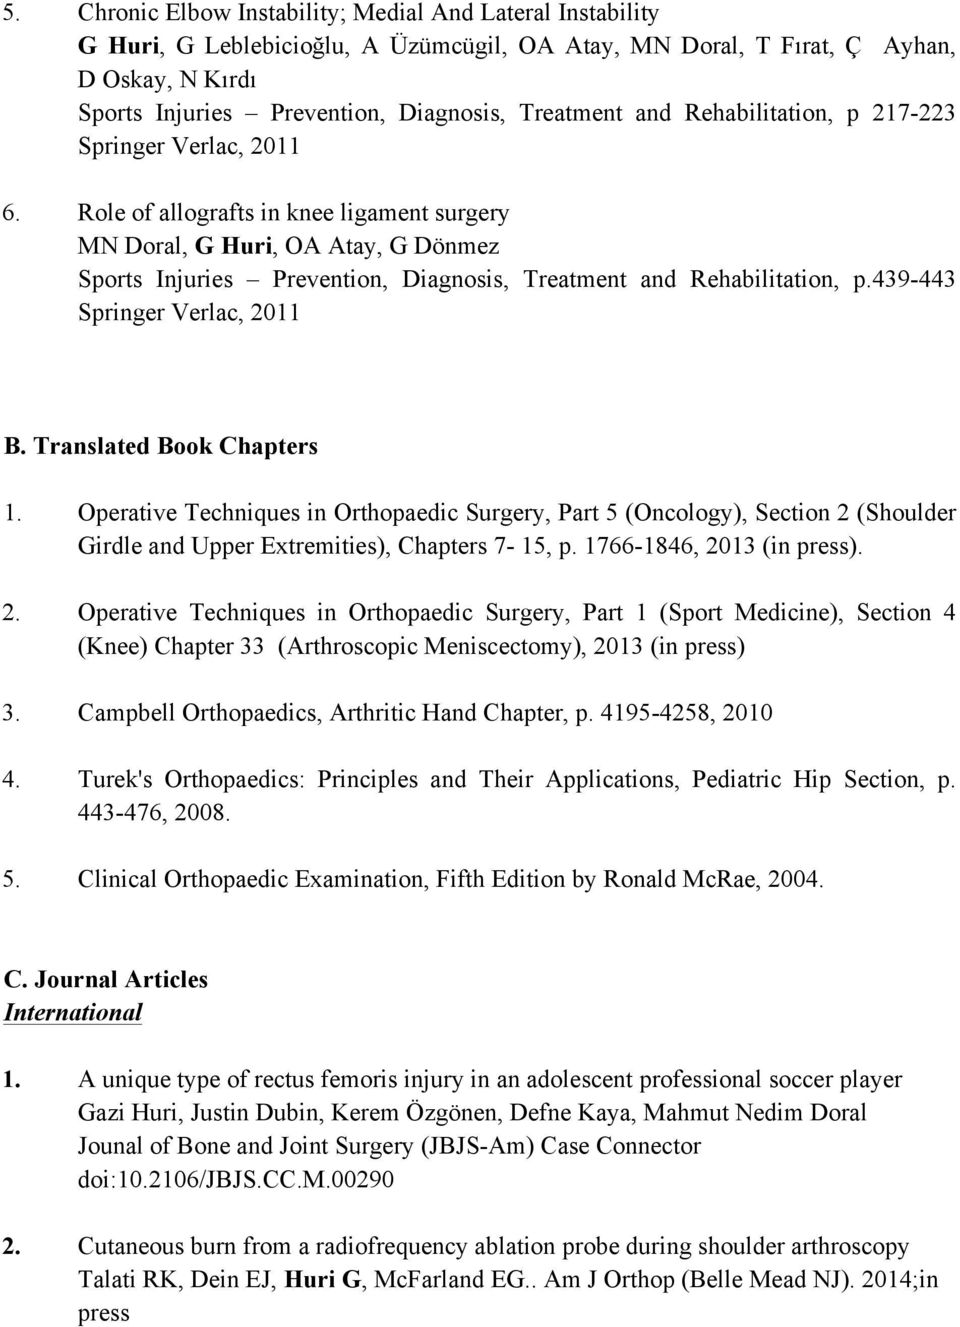 Role of allografts in knee ligament surgery MN Doral, G Huri, OA Atay, G Dönmez Sports Injuries Prevention, Diagnosis, Treatment and Rehabilitation, p.439-443 Springer Verlac, 2011 B.